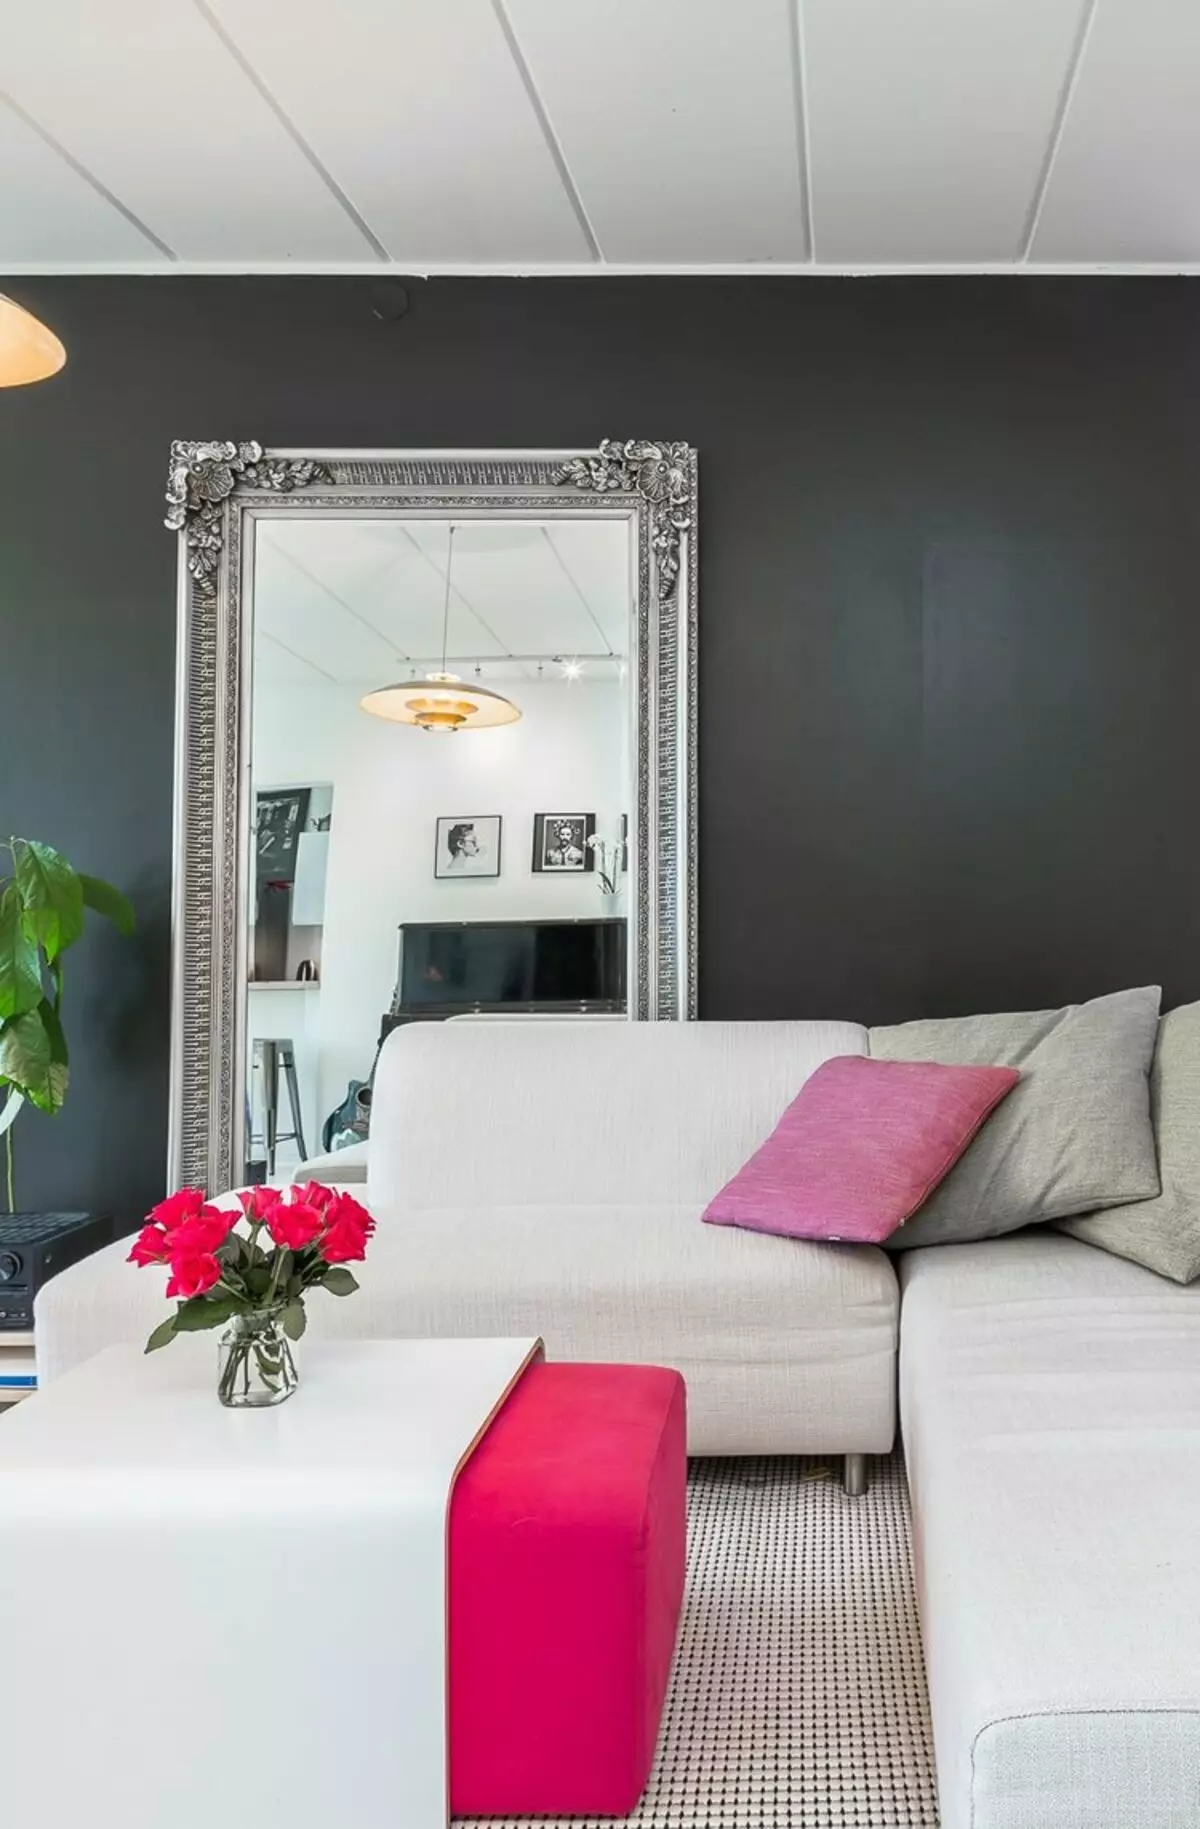 Large mirror in the living room